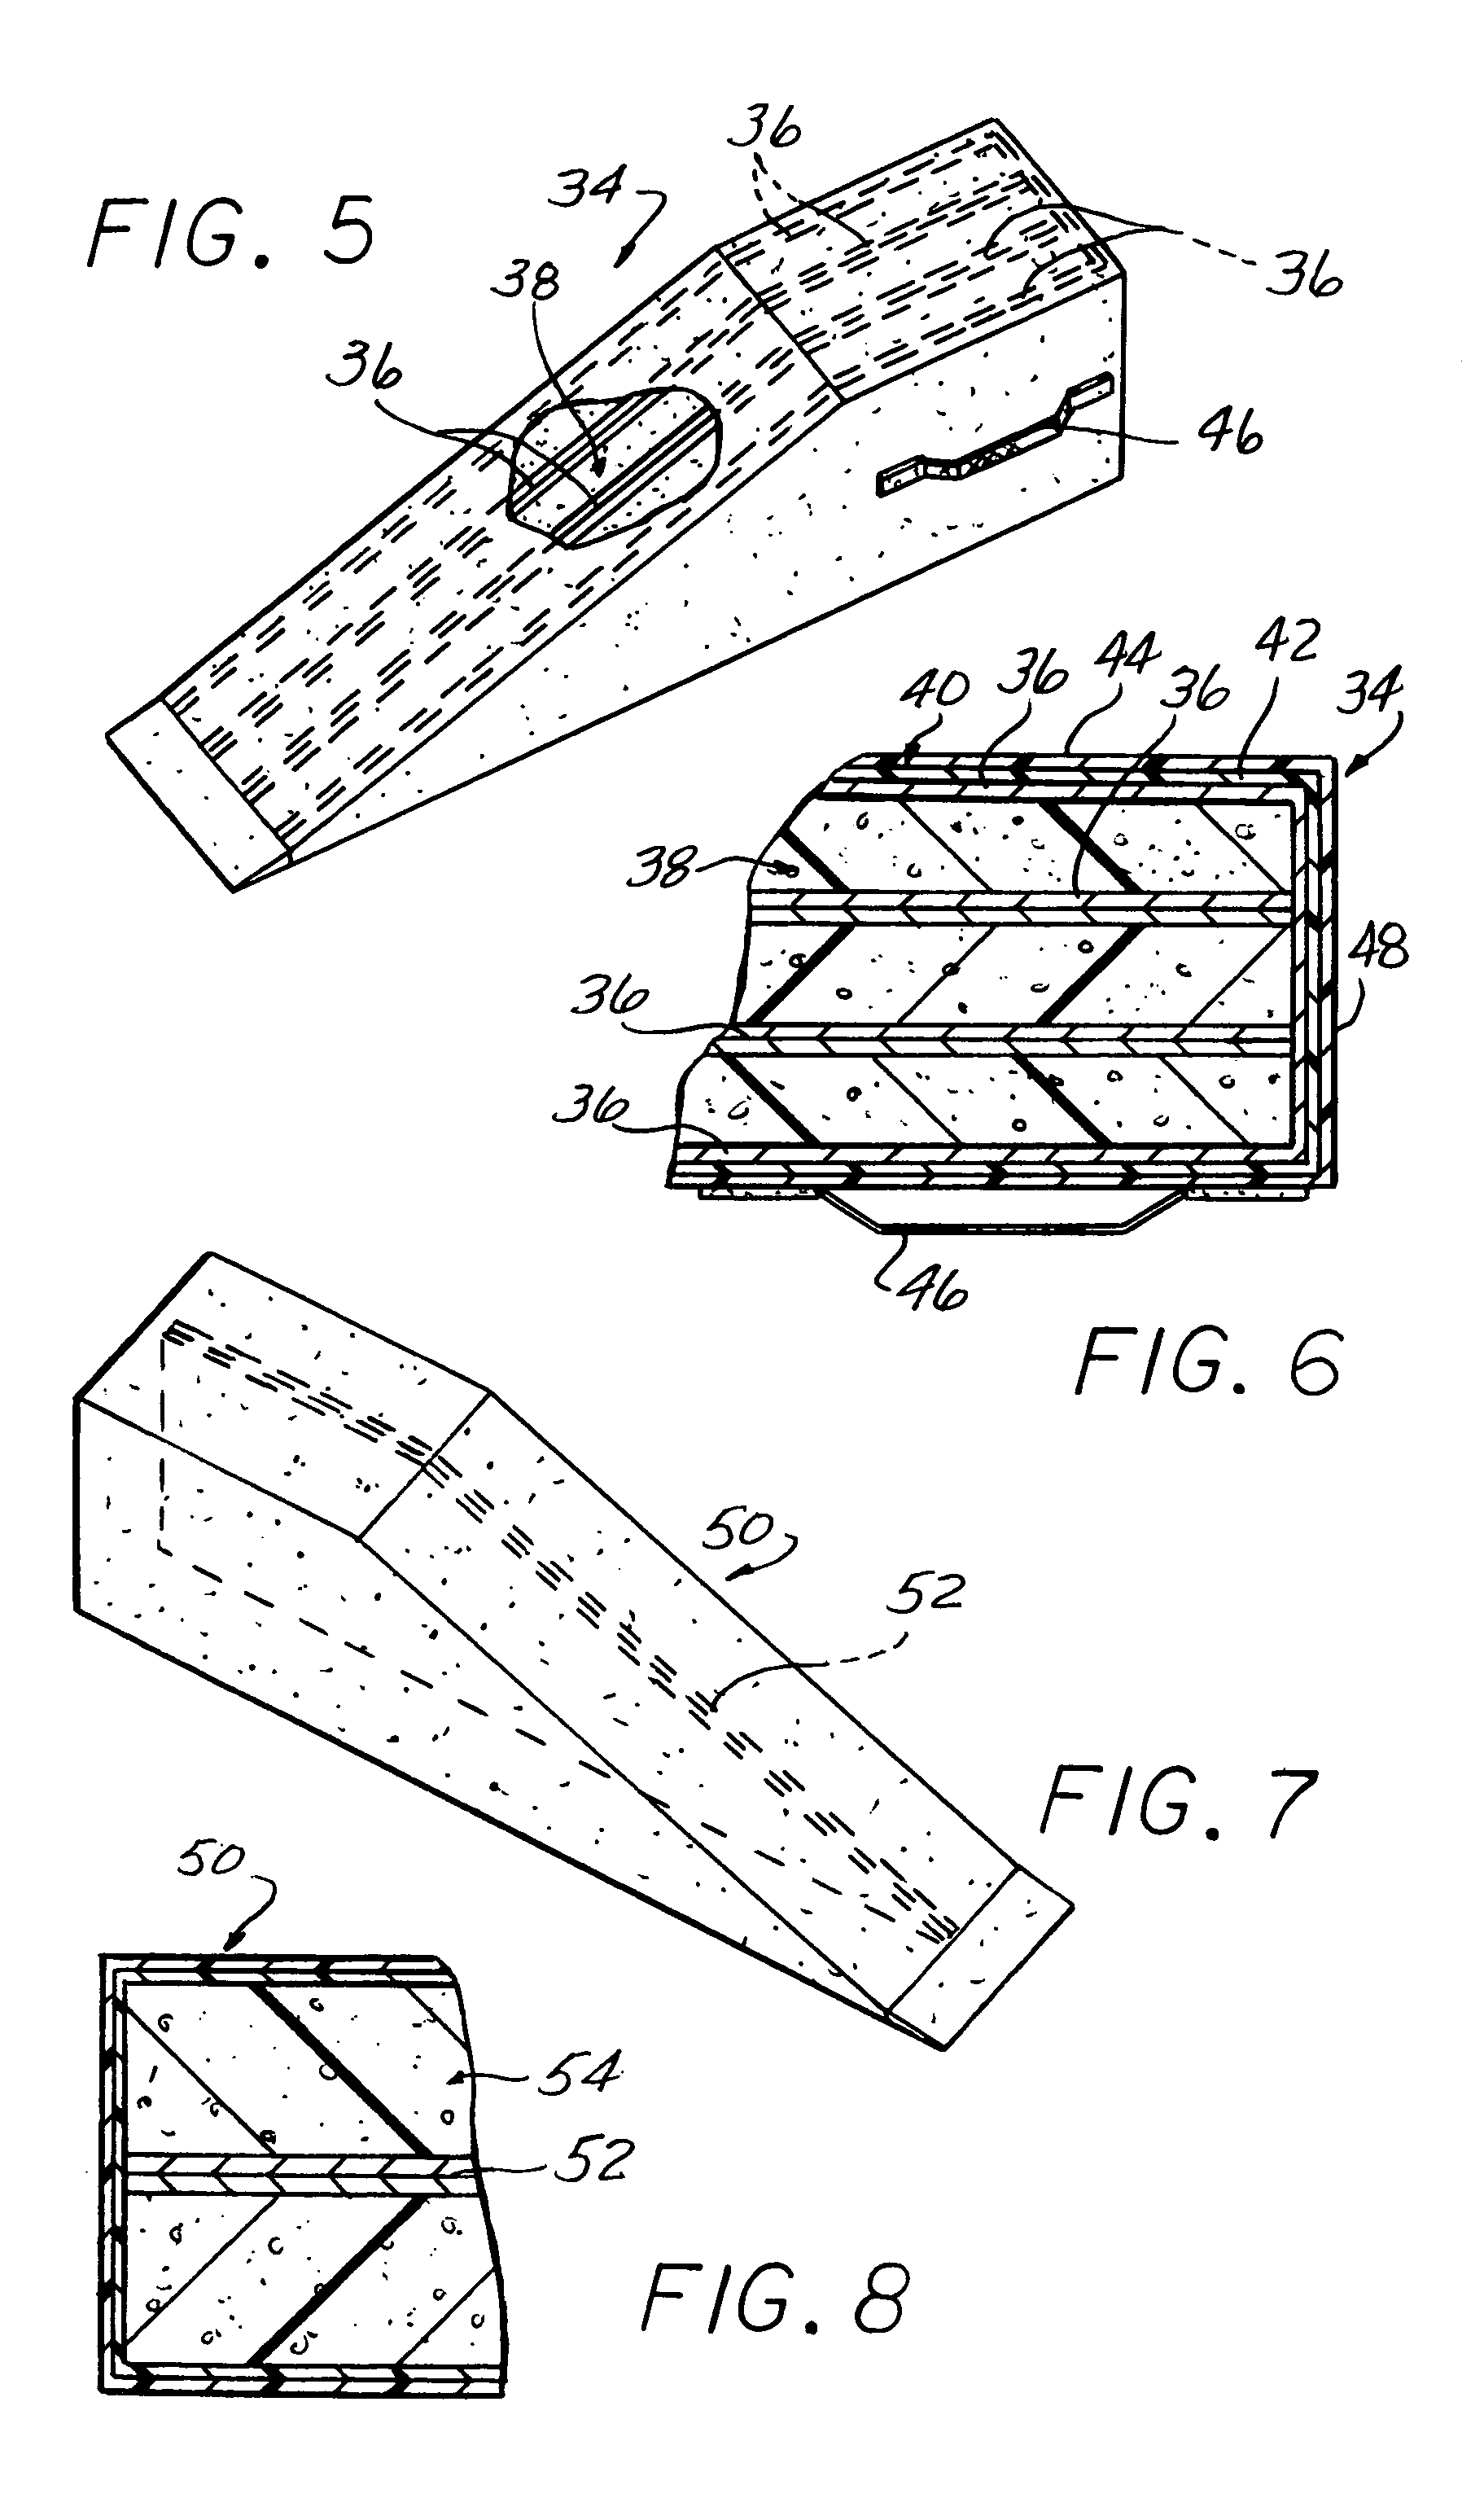 Ramp and method of construction